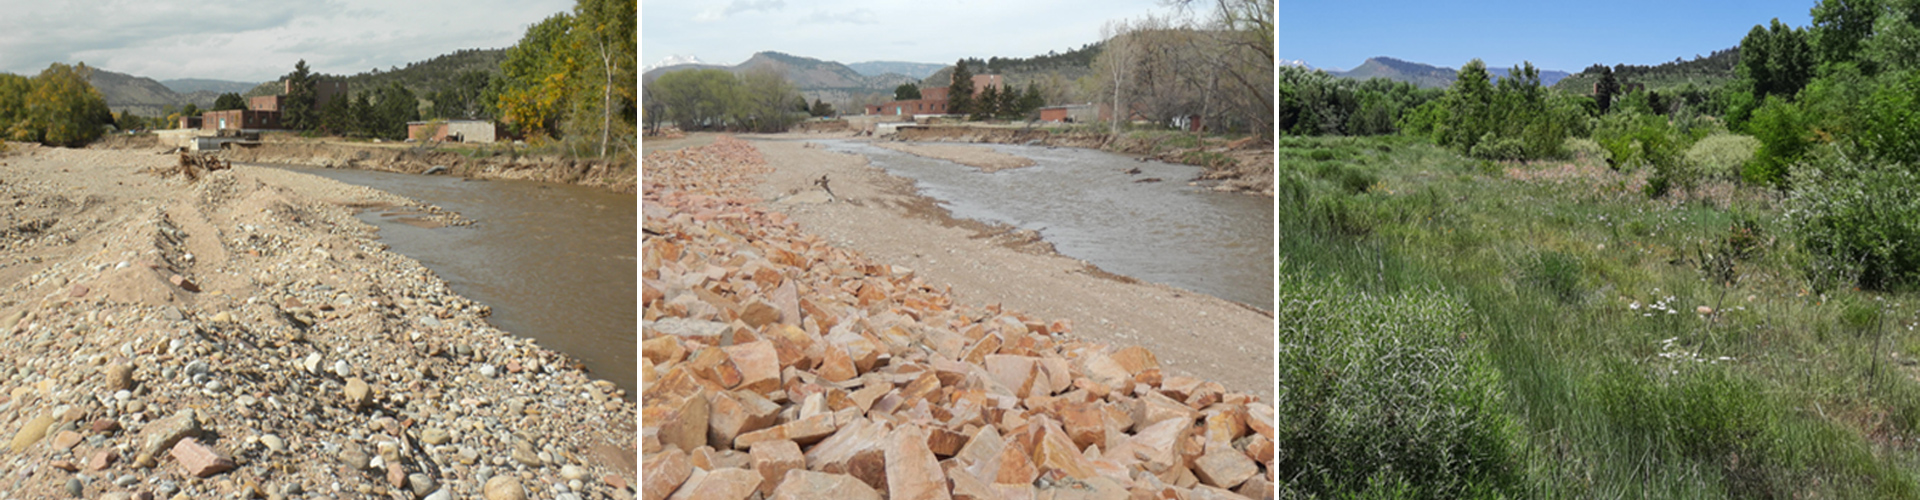 Three images from the same location along the St. Vrain Creek different stages of recovery work.